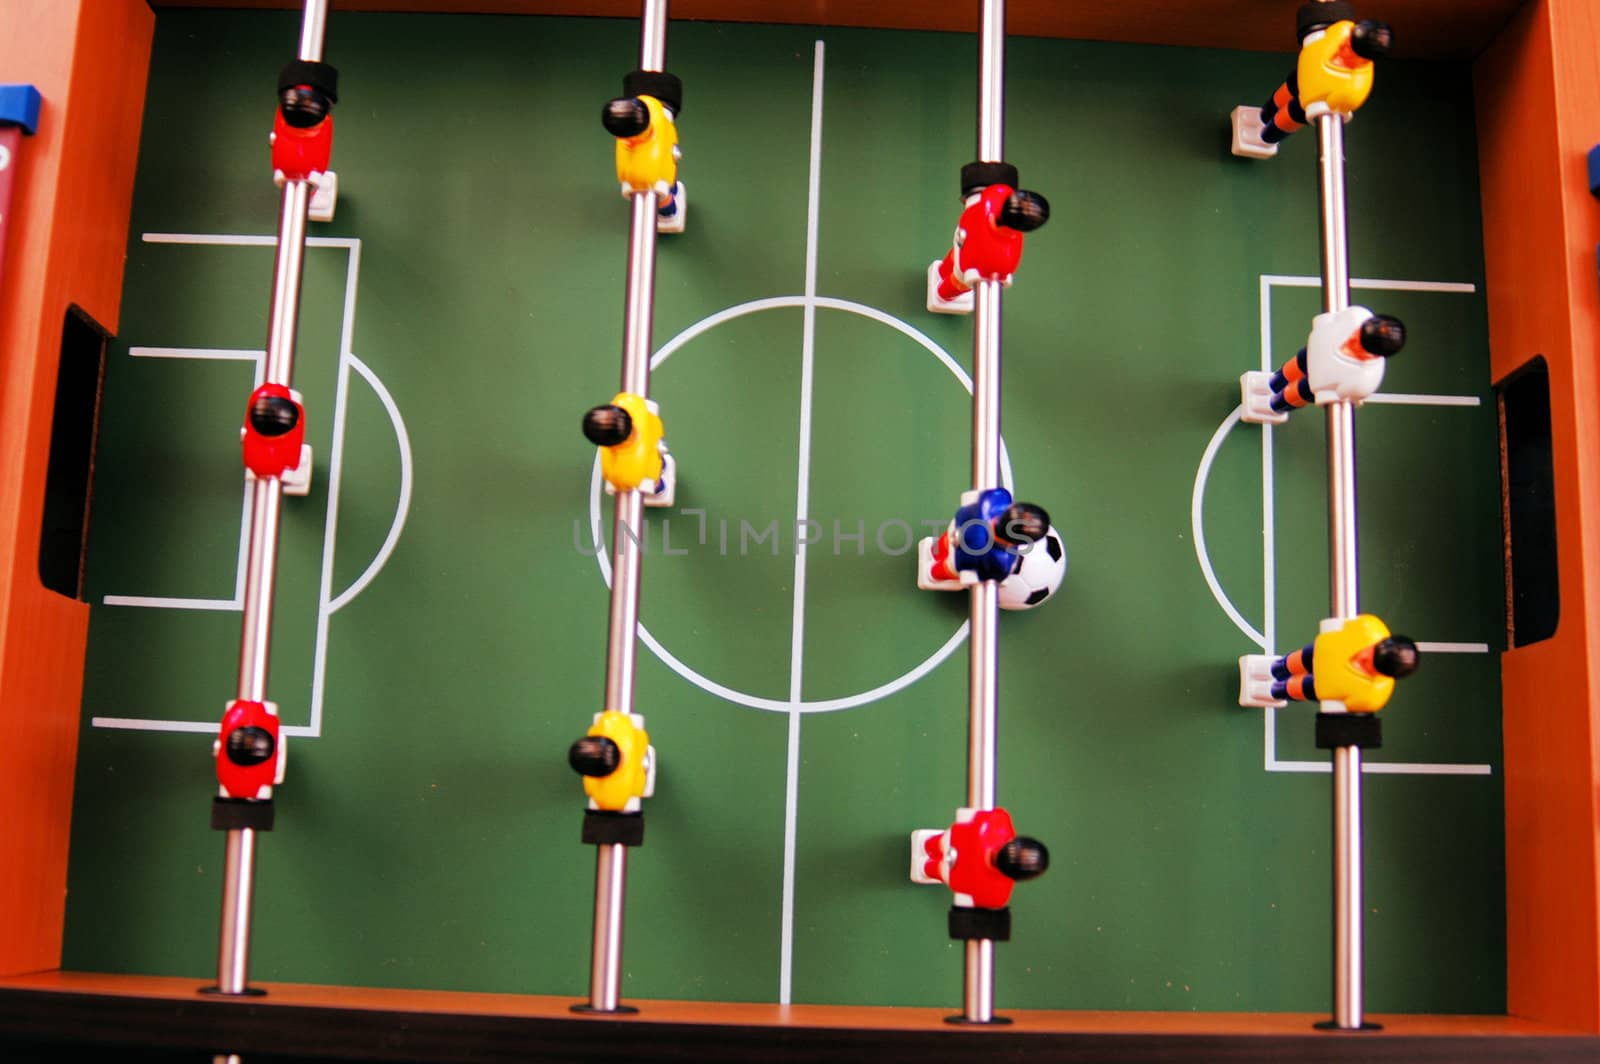 View from above on a foosball table